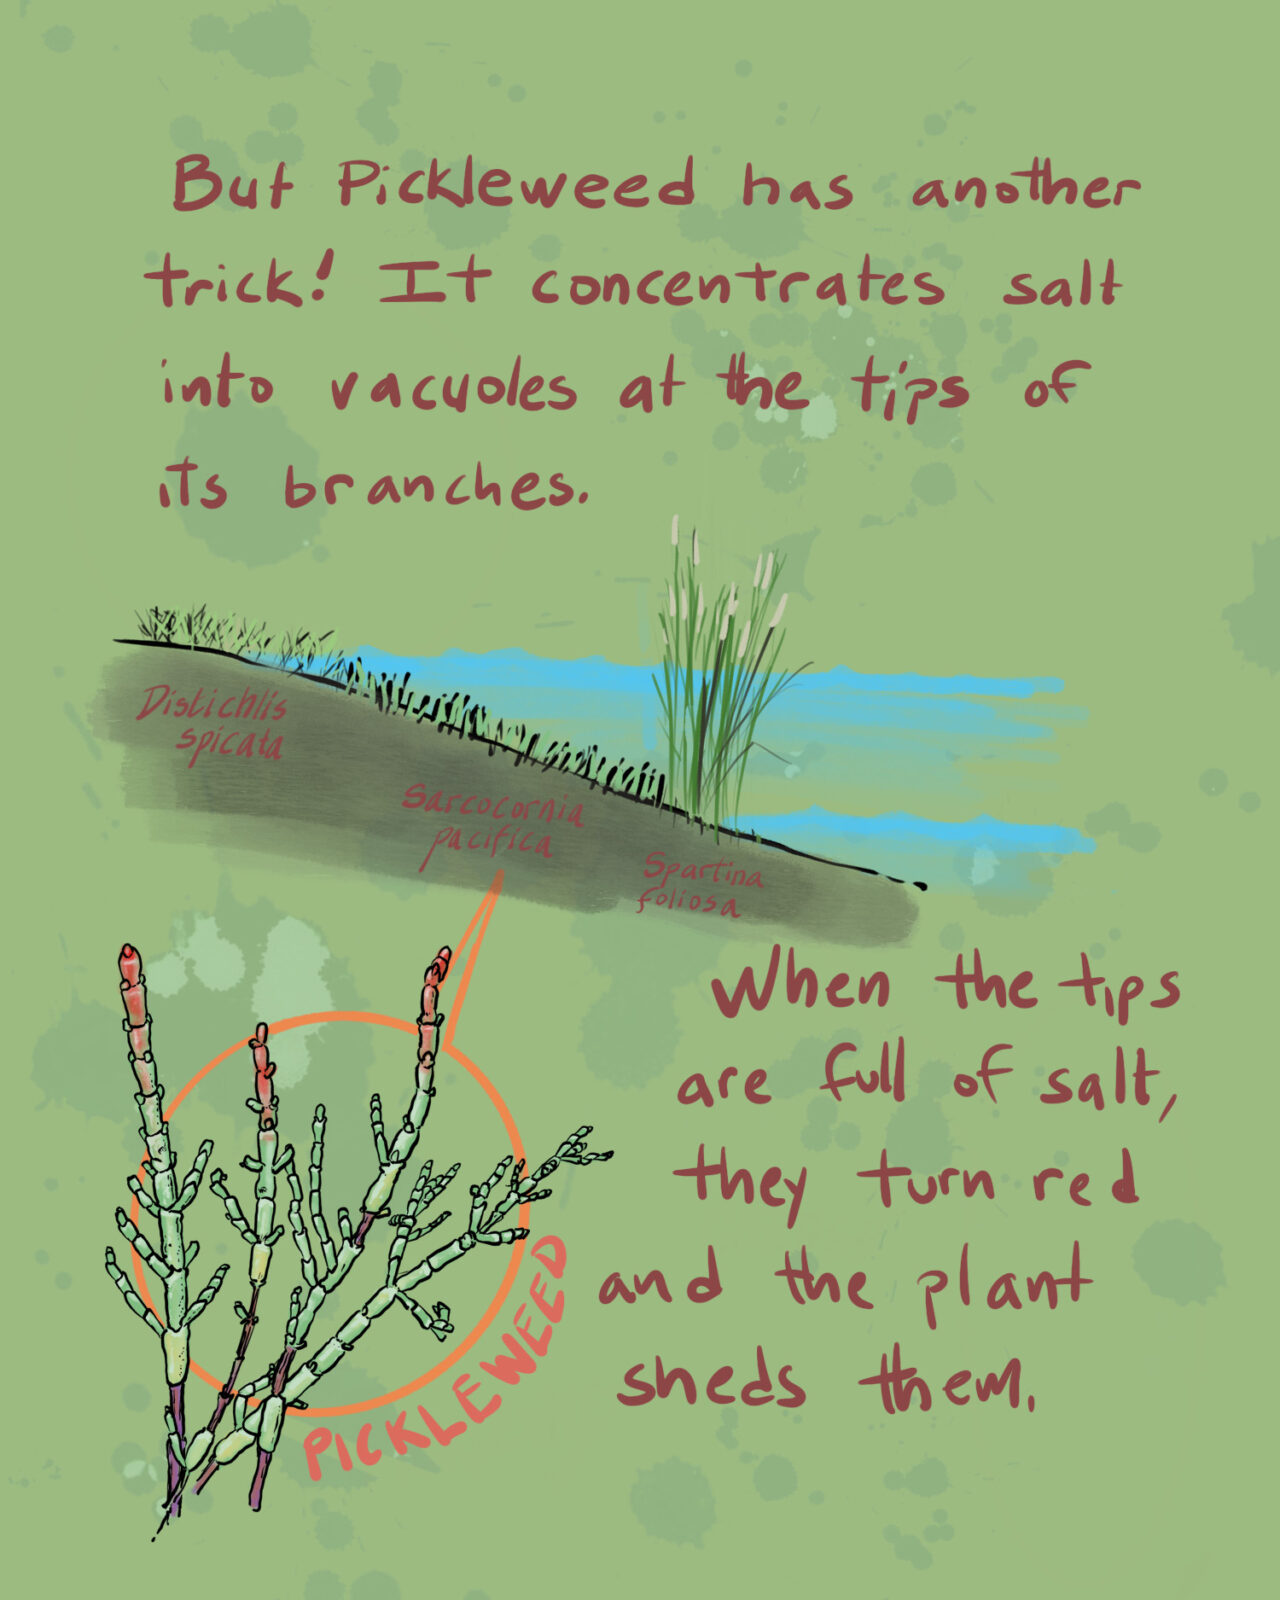 But pickleweed has another trick! It concentrates salt into vacuoles at the tips of its branches. When the tips are full of salt, they turn red and the plant sheds them.